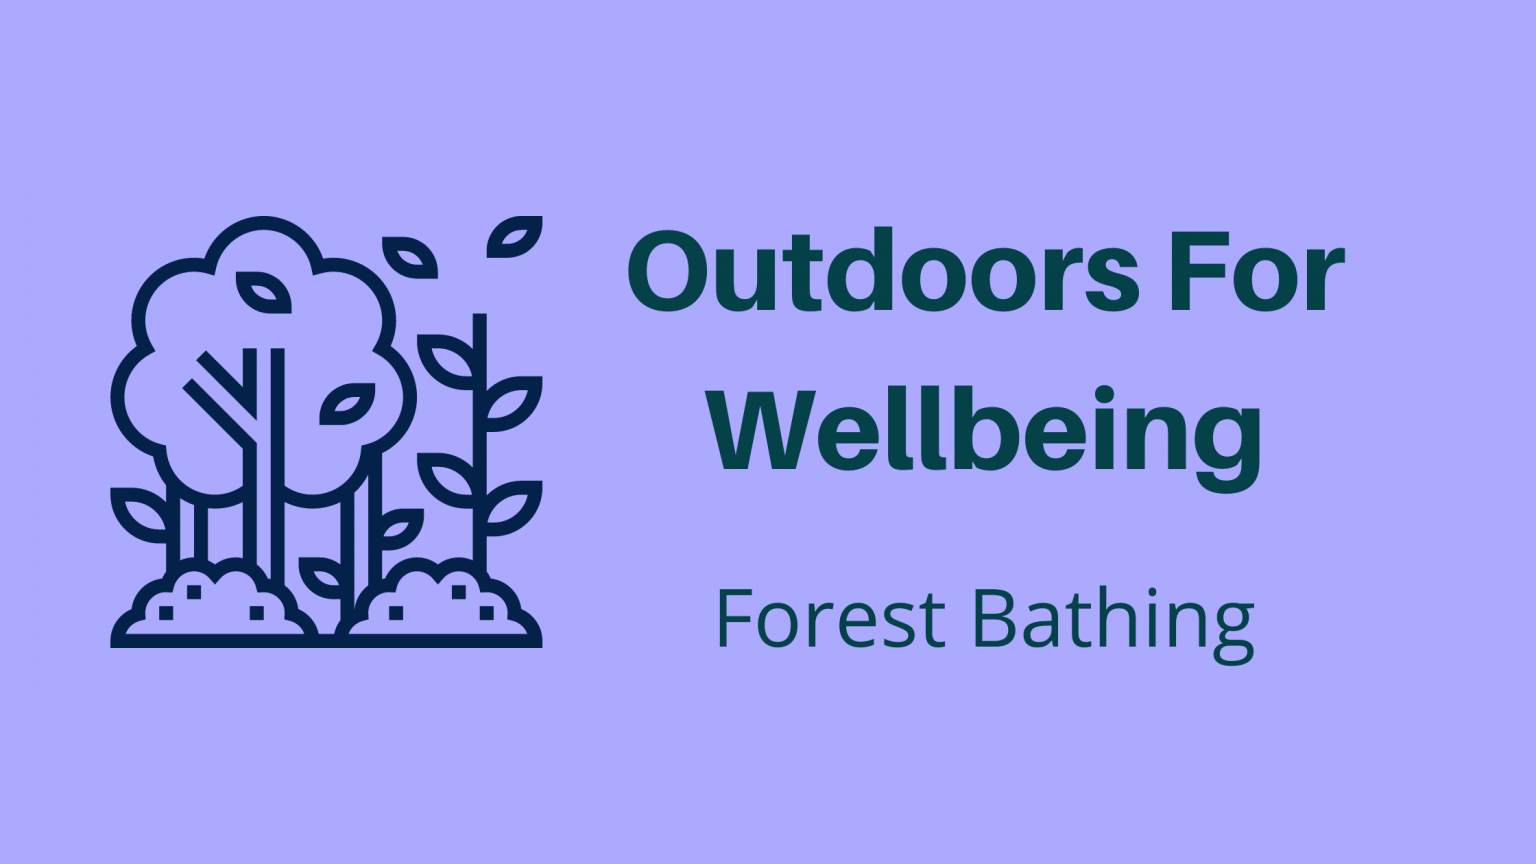 Outdoors for wellbeing #3 - Forest Bathing - Outside the Box